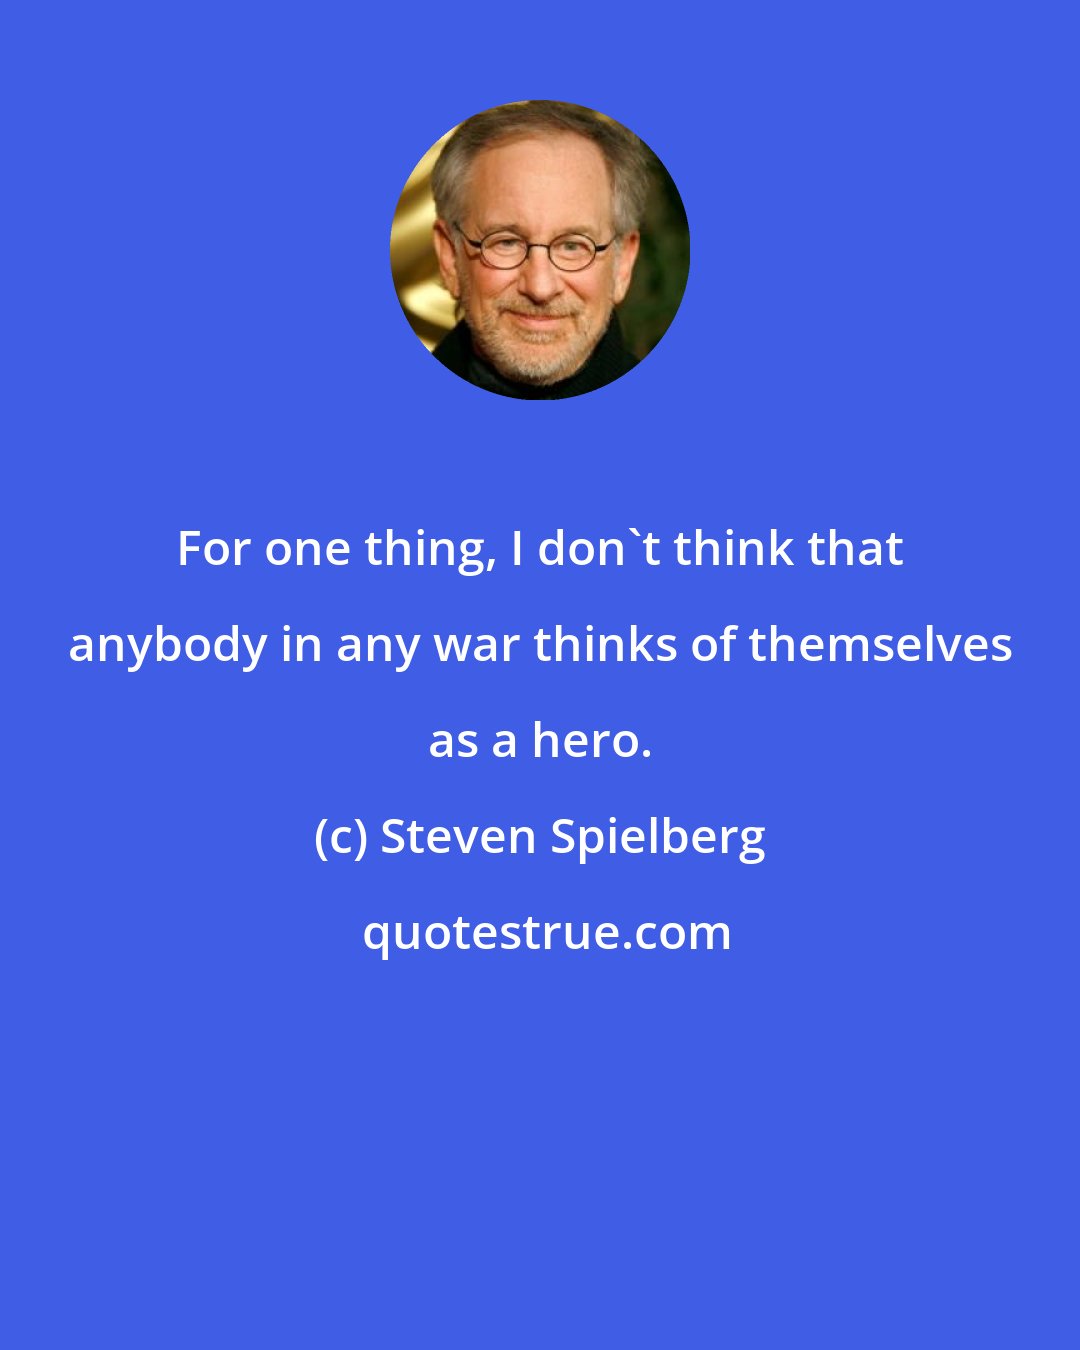 Steven Spielberg: For one thing, I don't think that anybody in any war thinks of themselves as a hero.